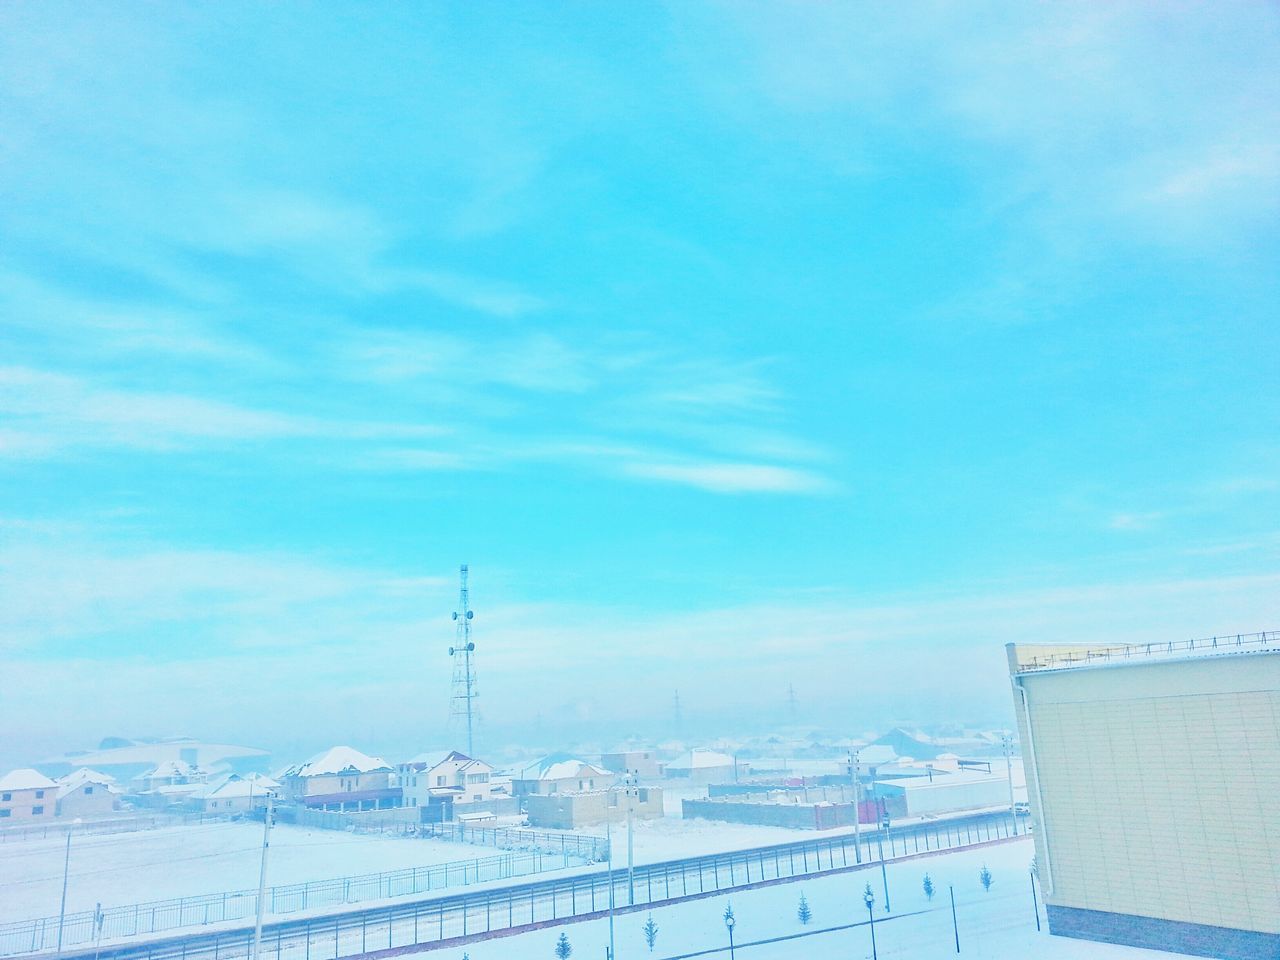 snow, winter, built structure, cold temperature, sky, architecture, building exterior, blue, weather, connection, cloud - sky, season, communication, day, outdoors, technology, copy space, no people, nature, electricity